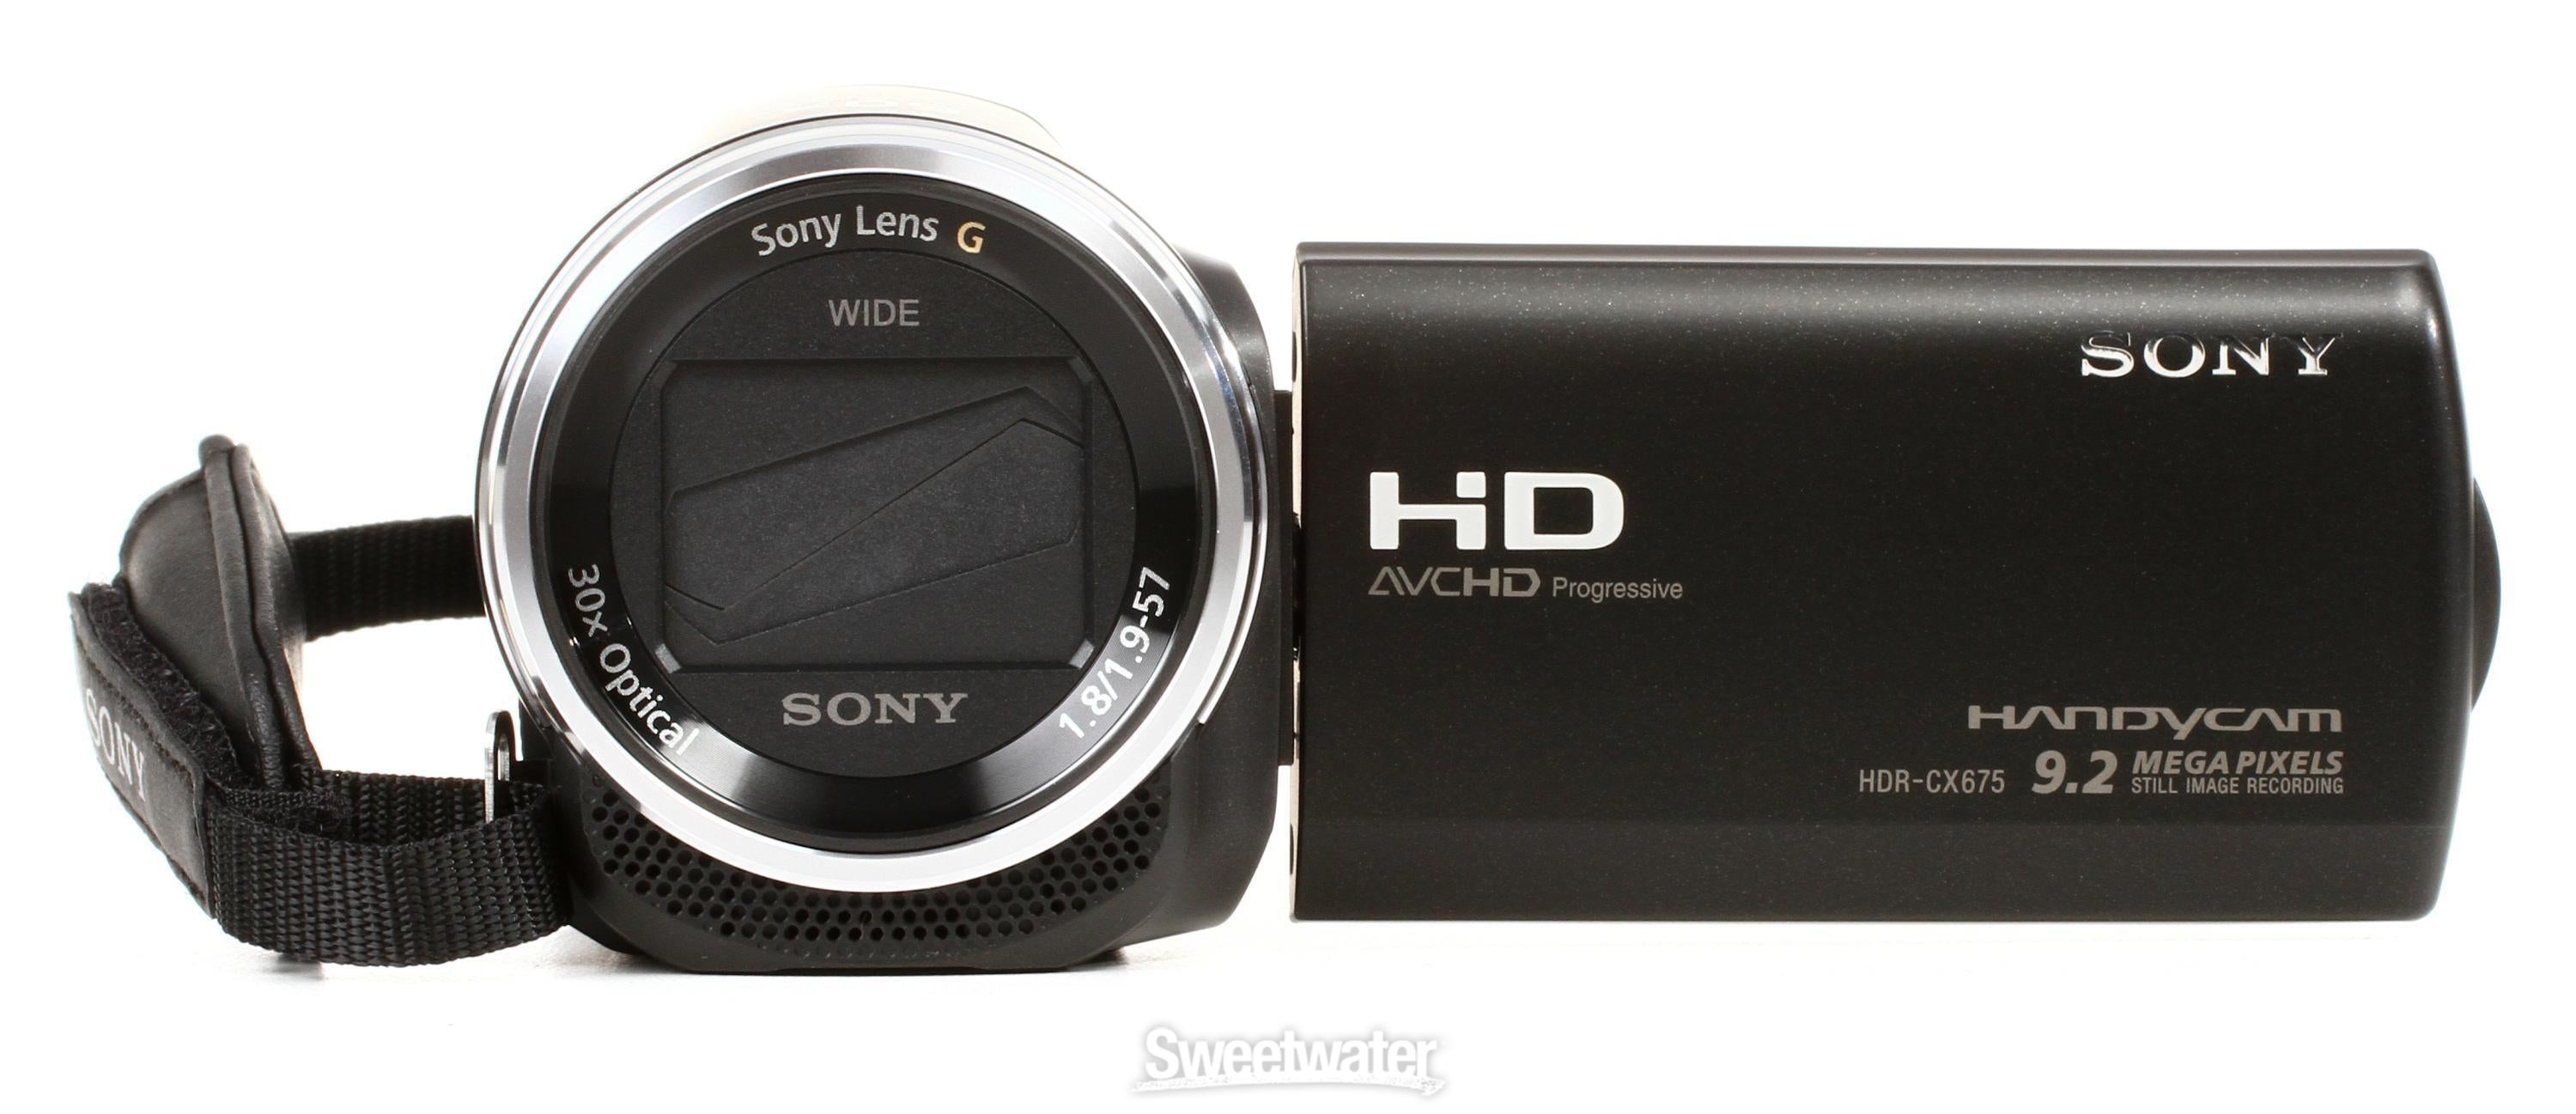 Sony HDR-CX675 Handycam 1080p Full HD Camcorder Reviews | Sweetwater